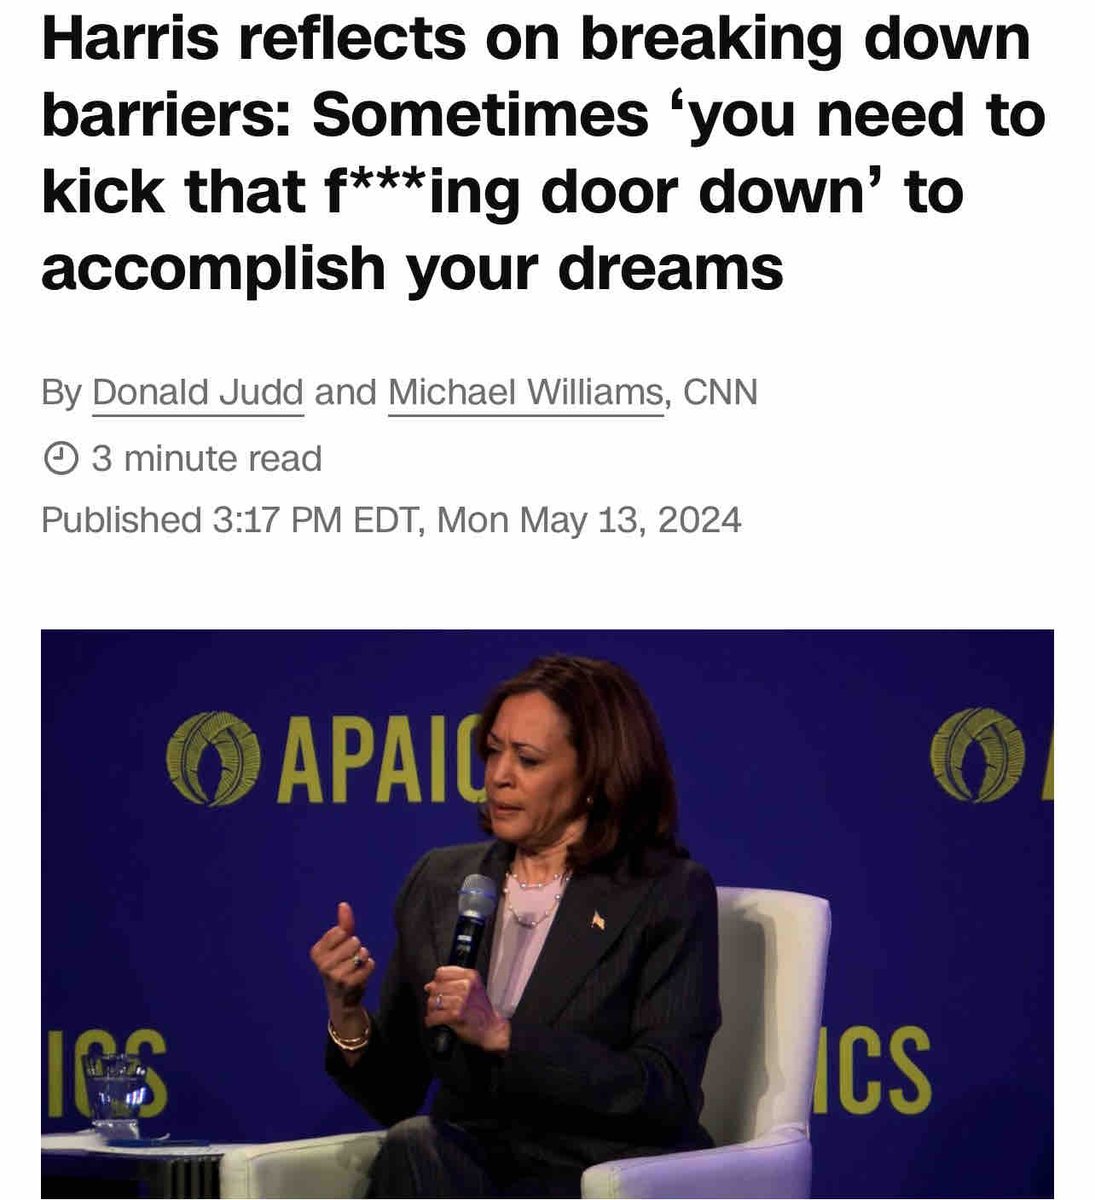 “Vice President Kamala Harris on Monday reflected on her experiences as a barrier-breaking public figure, telling a crowd in blunt terms that sometimes they need to take it upon themselves strive for their own opportunities” ow.ly/Bkoi50RF4XW